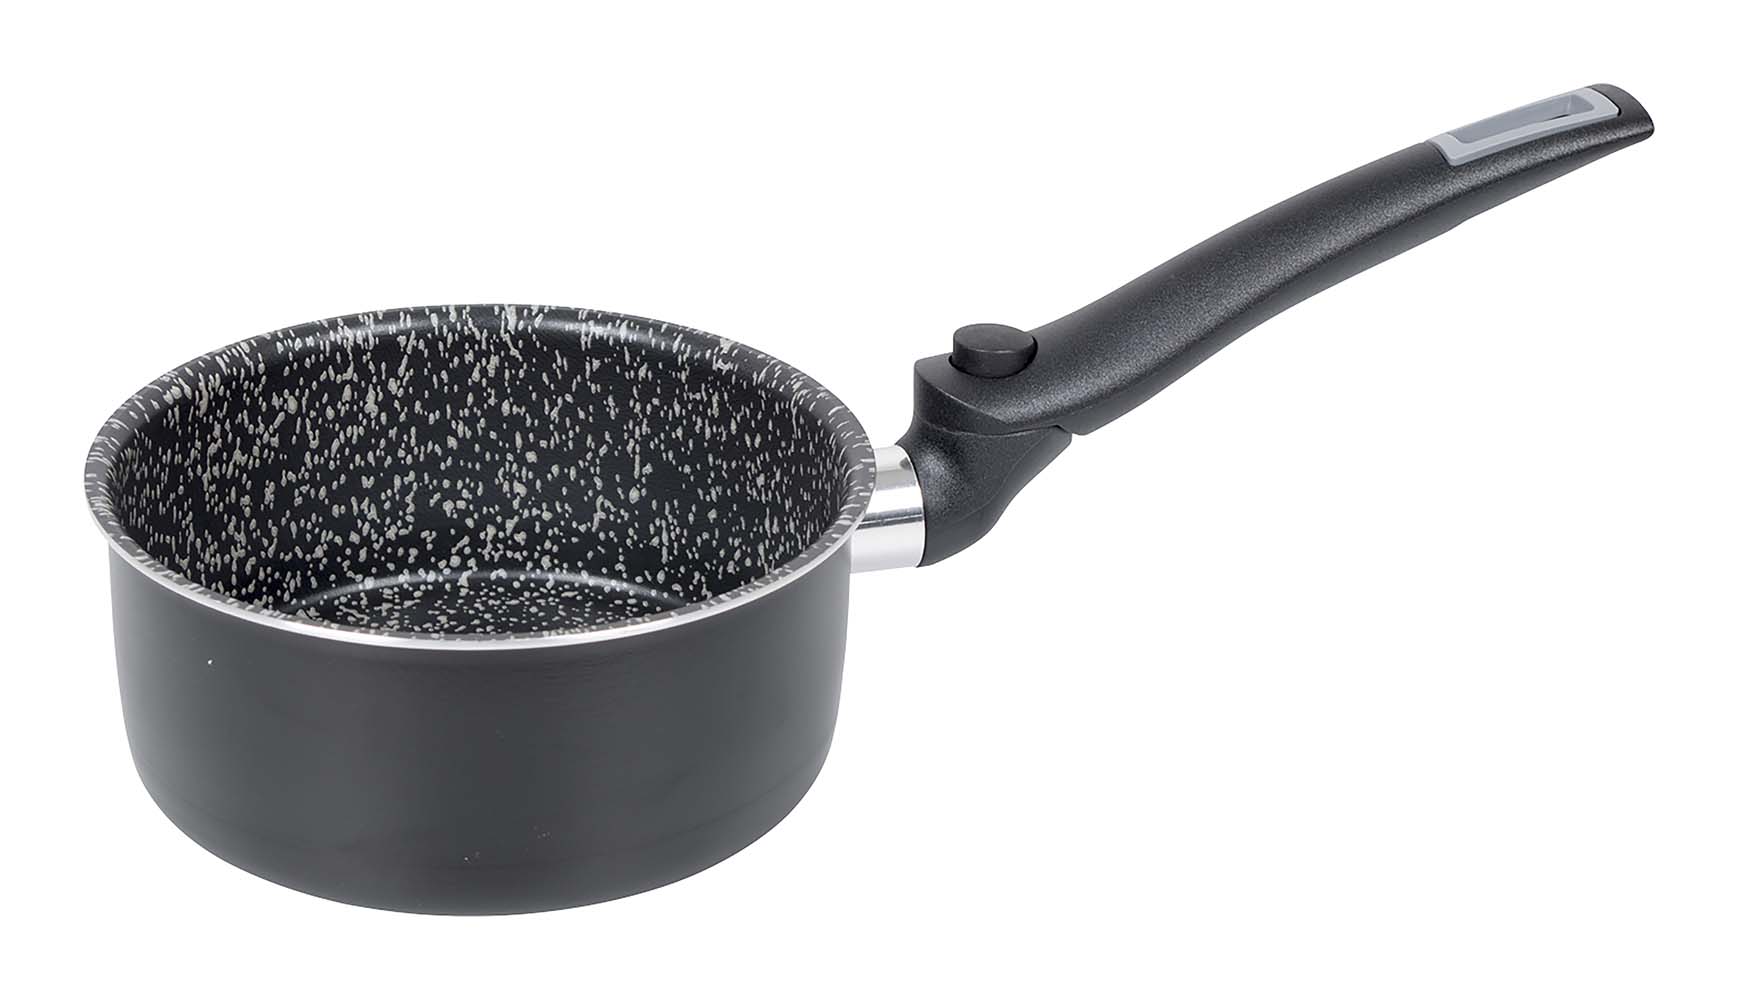 2304450 An aluminium saucepan with foldaway handle. Comes with a 5 layer Salus Stone coating and an anti-slip base. This pan has a foldaway handle and therefore makes good use of space and is easy to take with you. Dishwasher safe and suitable for heat sources gas, ceramic,electric and induction. Thickness: 2.5 millimetres.